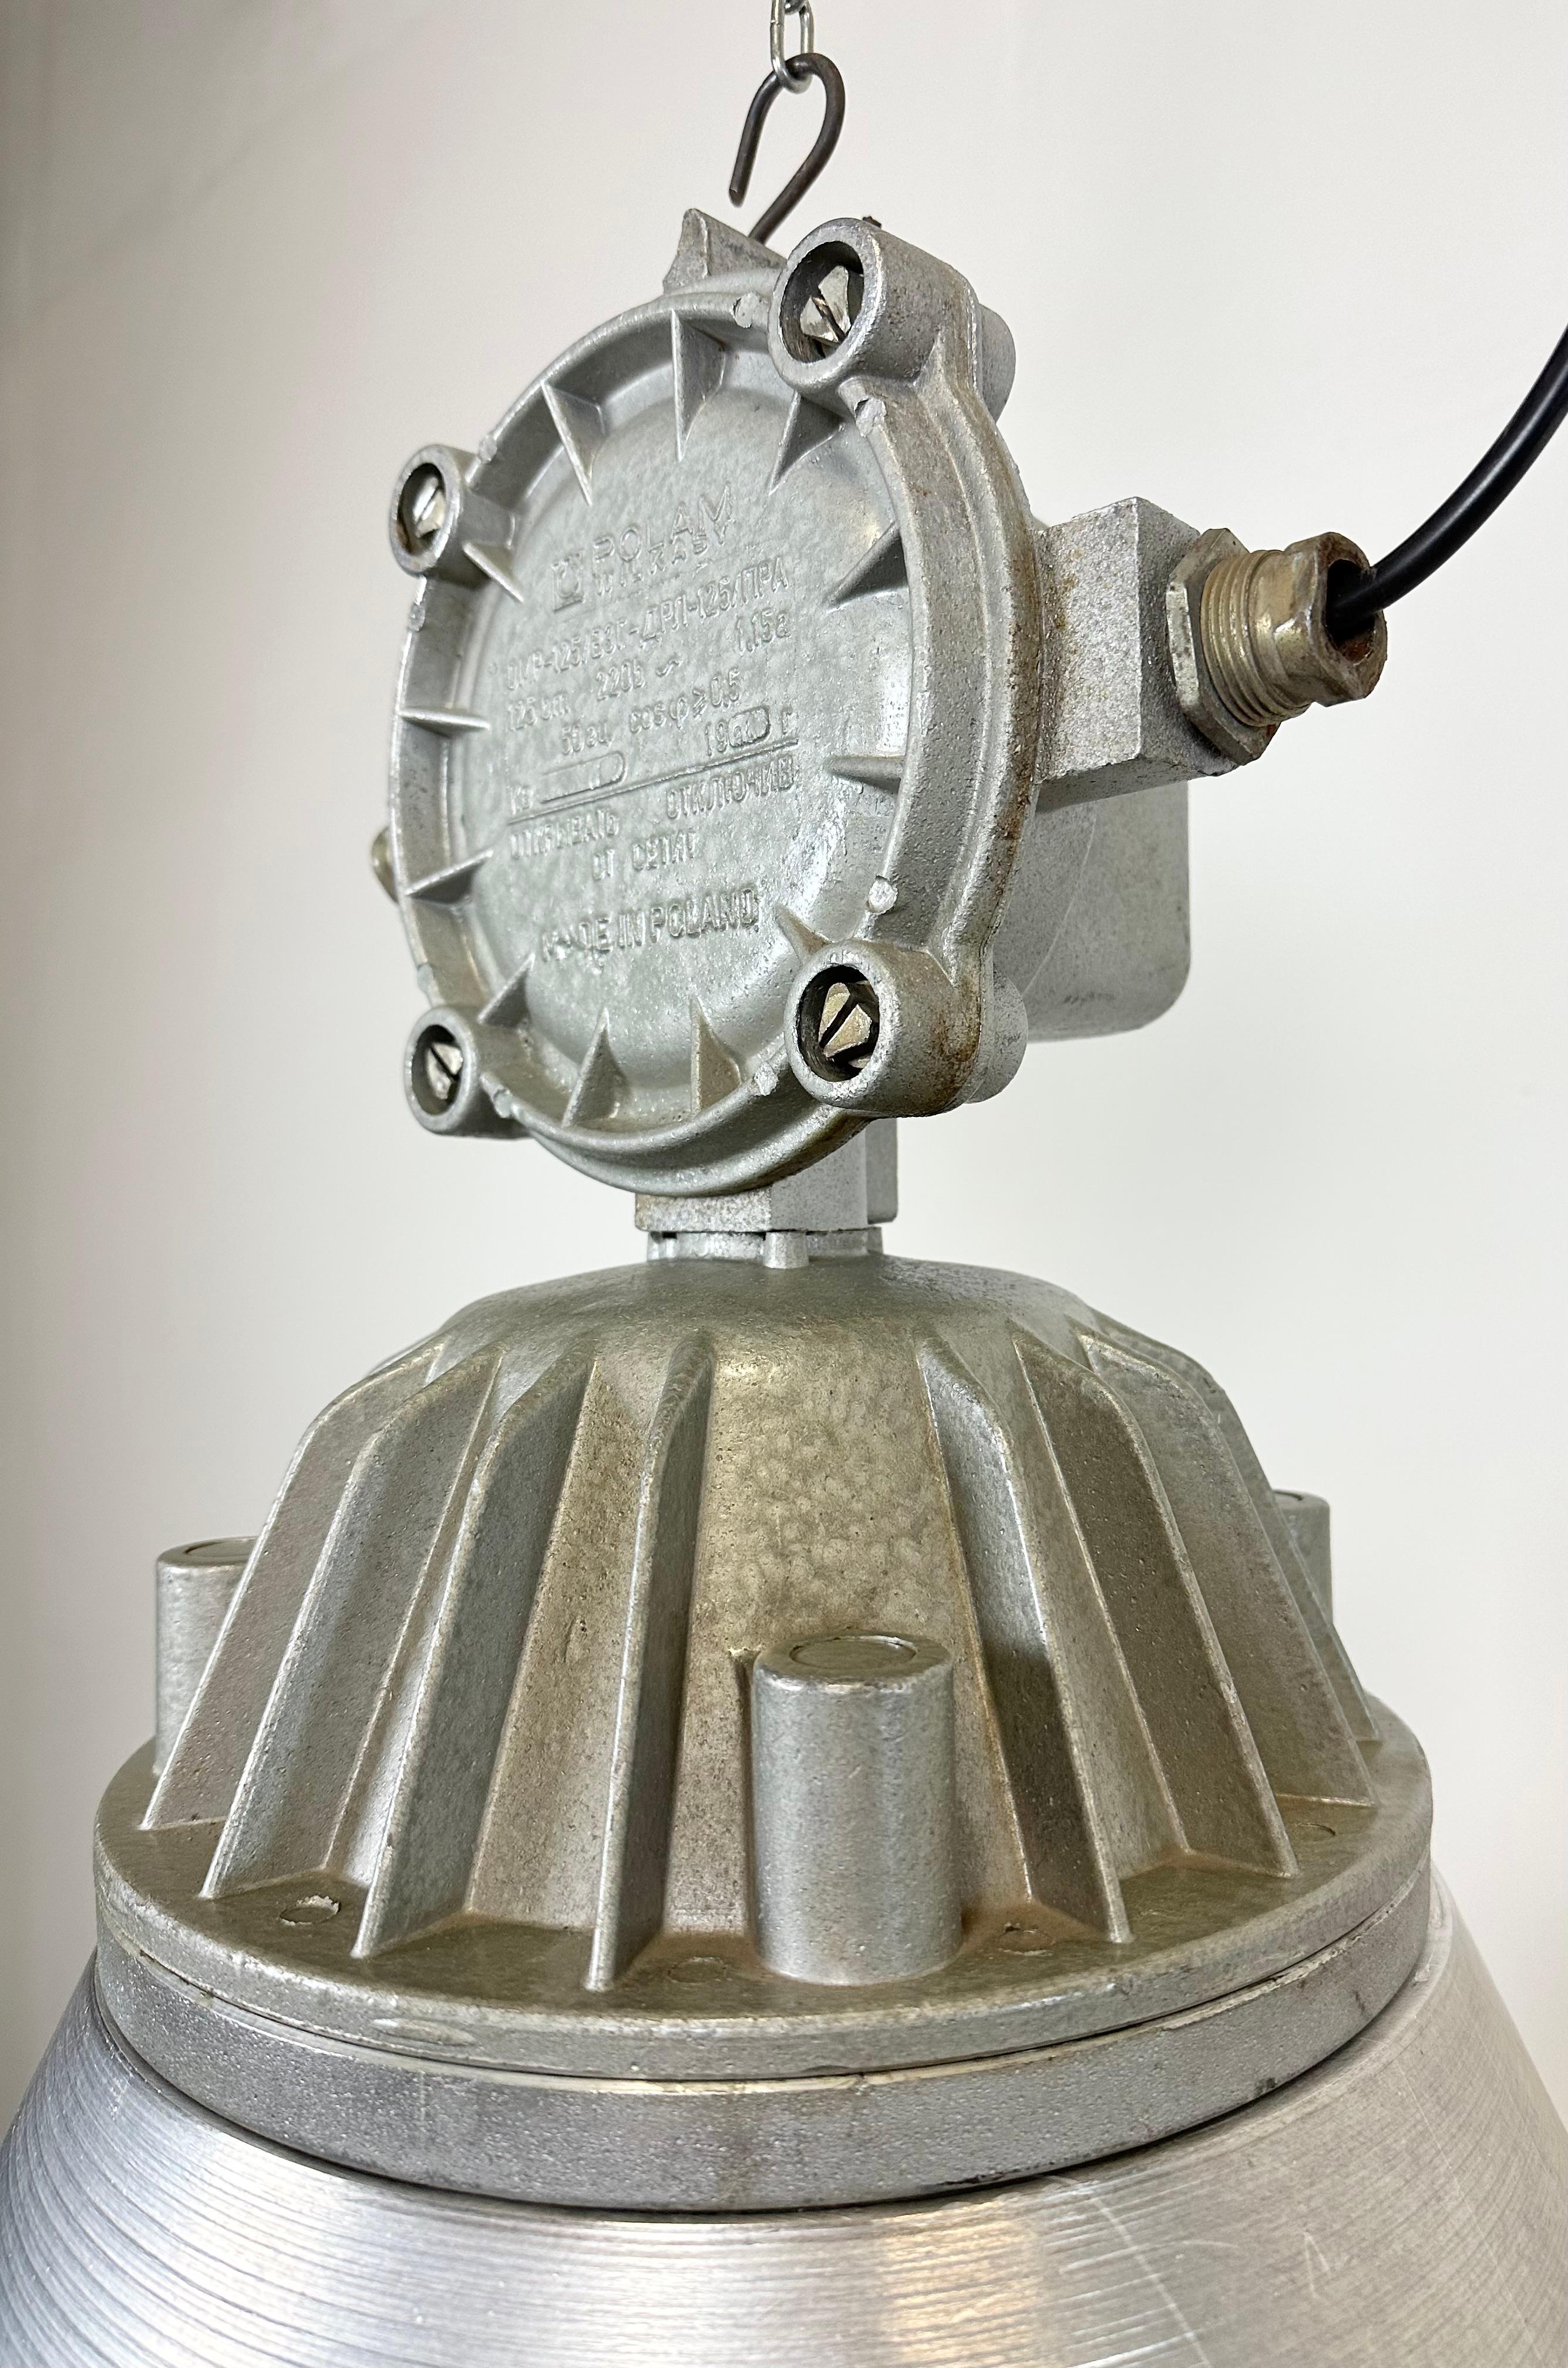 Large Industrial Cast Aluminium Cage Pendant Light from Polam Wilkasy, 1970s For Sale 2